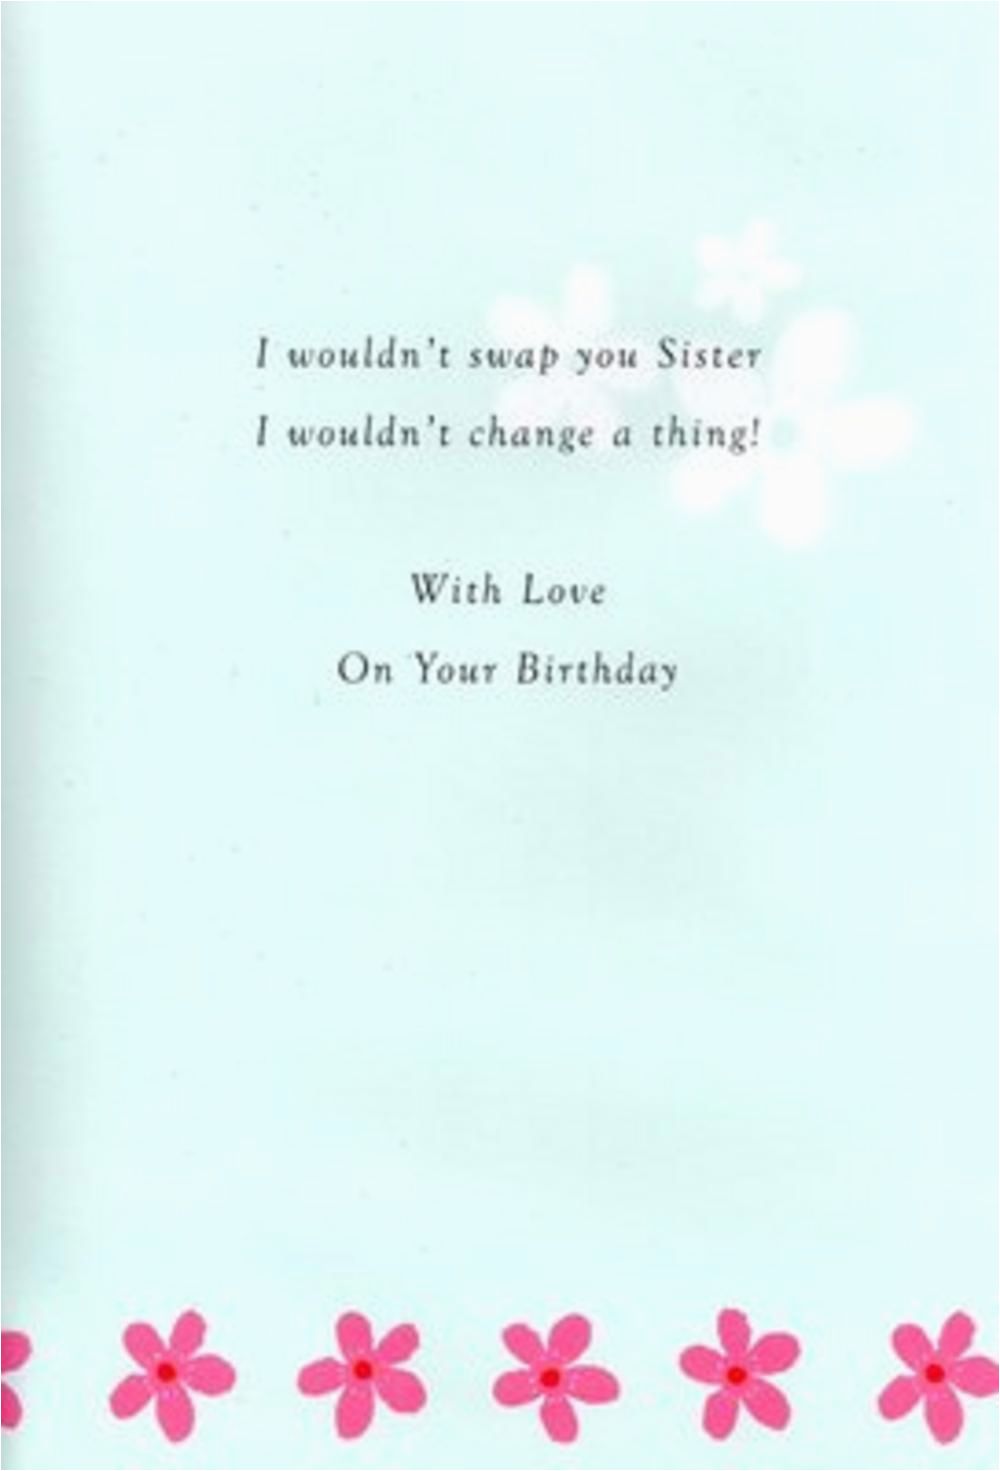 Verses for Birthday Cards for Sister Sister Birthday Poetry In Motion Card Cards Love Kates